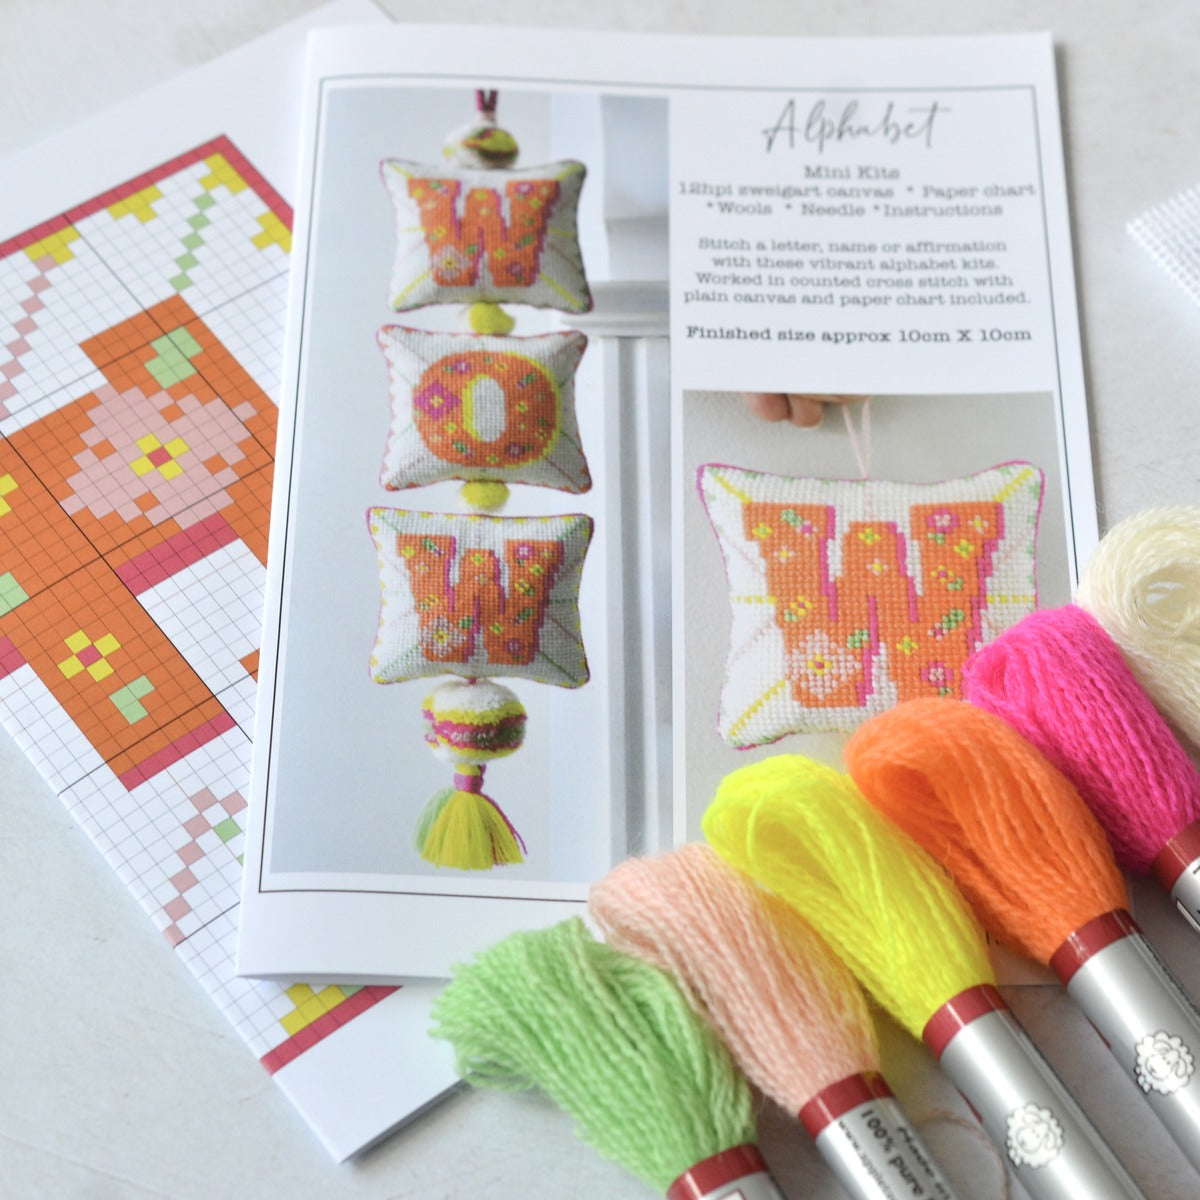 An image of an alphabet mini kit showing the contents, which includes skeins of appletons crewel wool, a printed paper chart and an instruction leaflet.